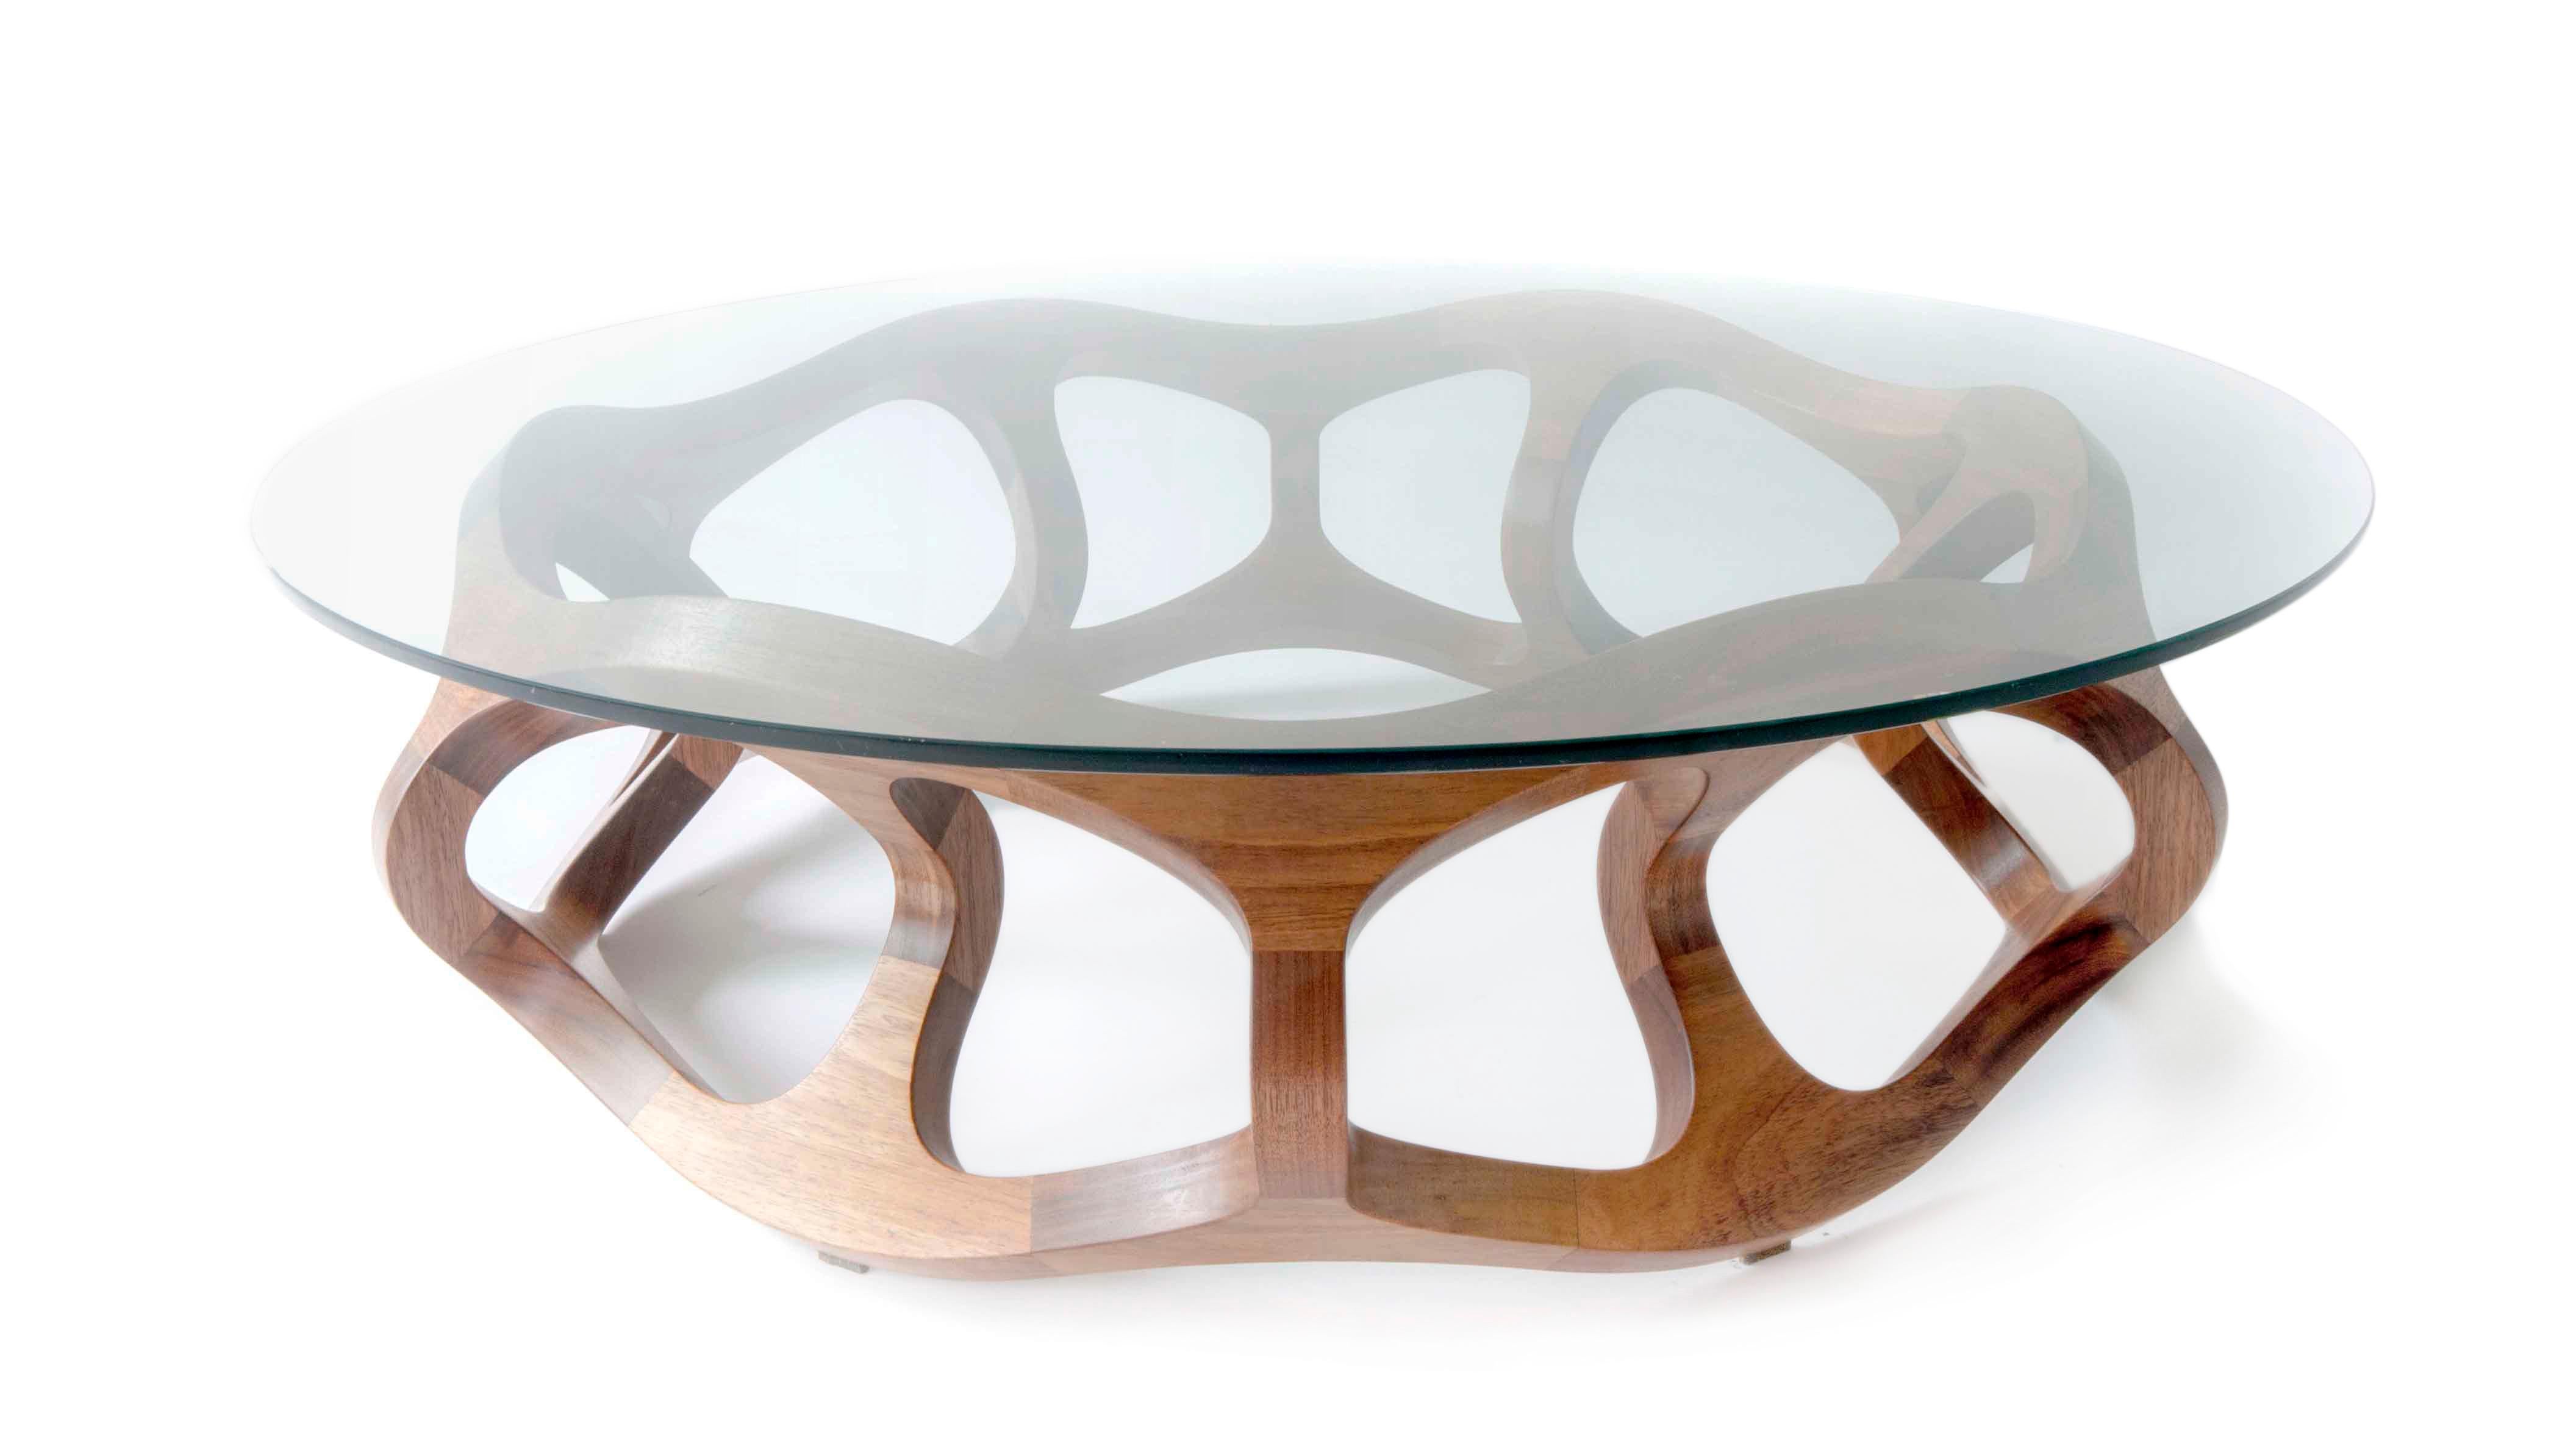 Toro G6, Geometric Sculptural Center Table Made of Solid Wood by Pedro Cerisola For Sale 7